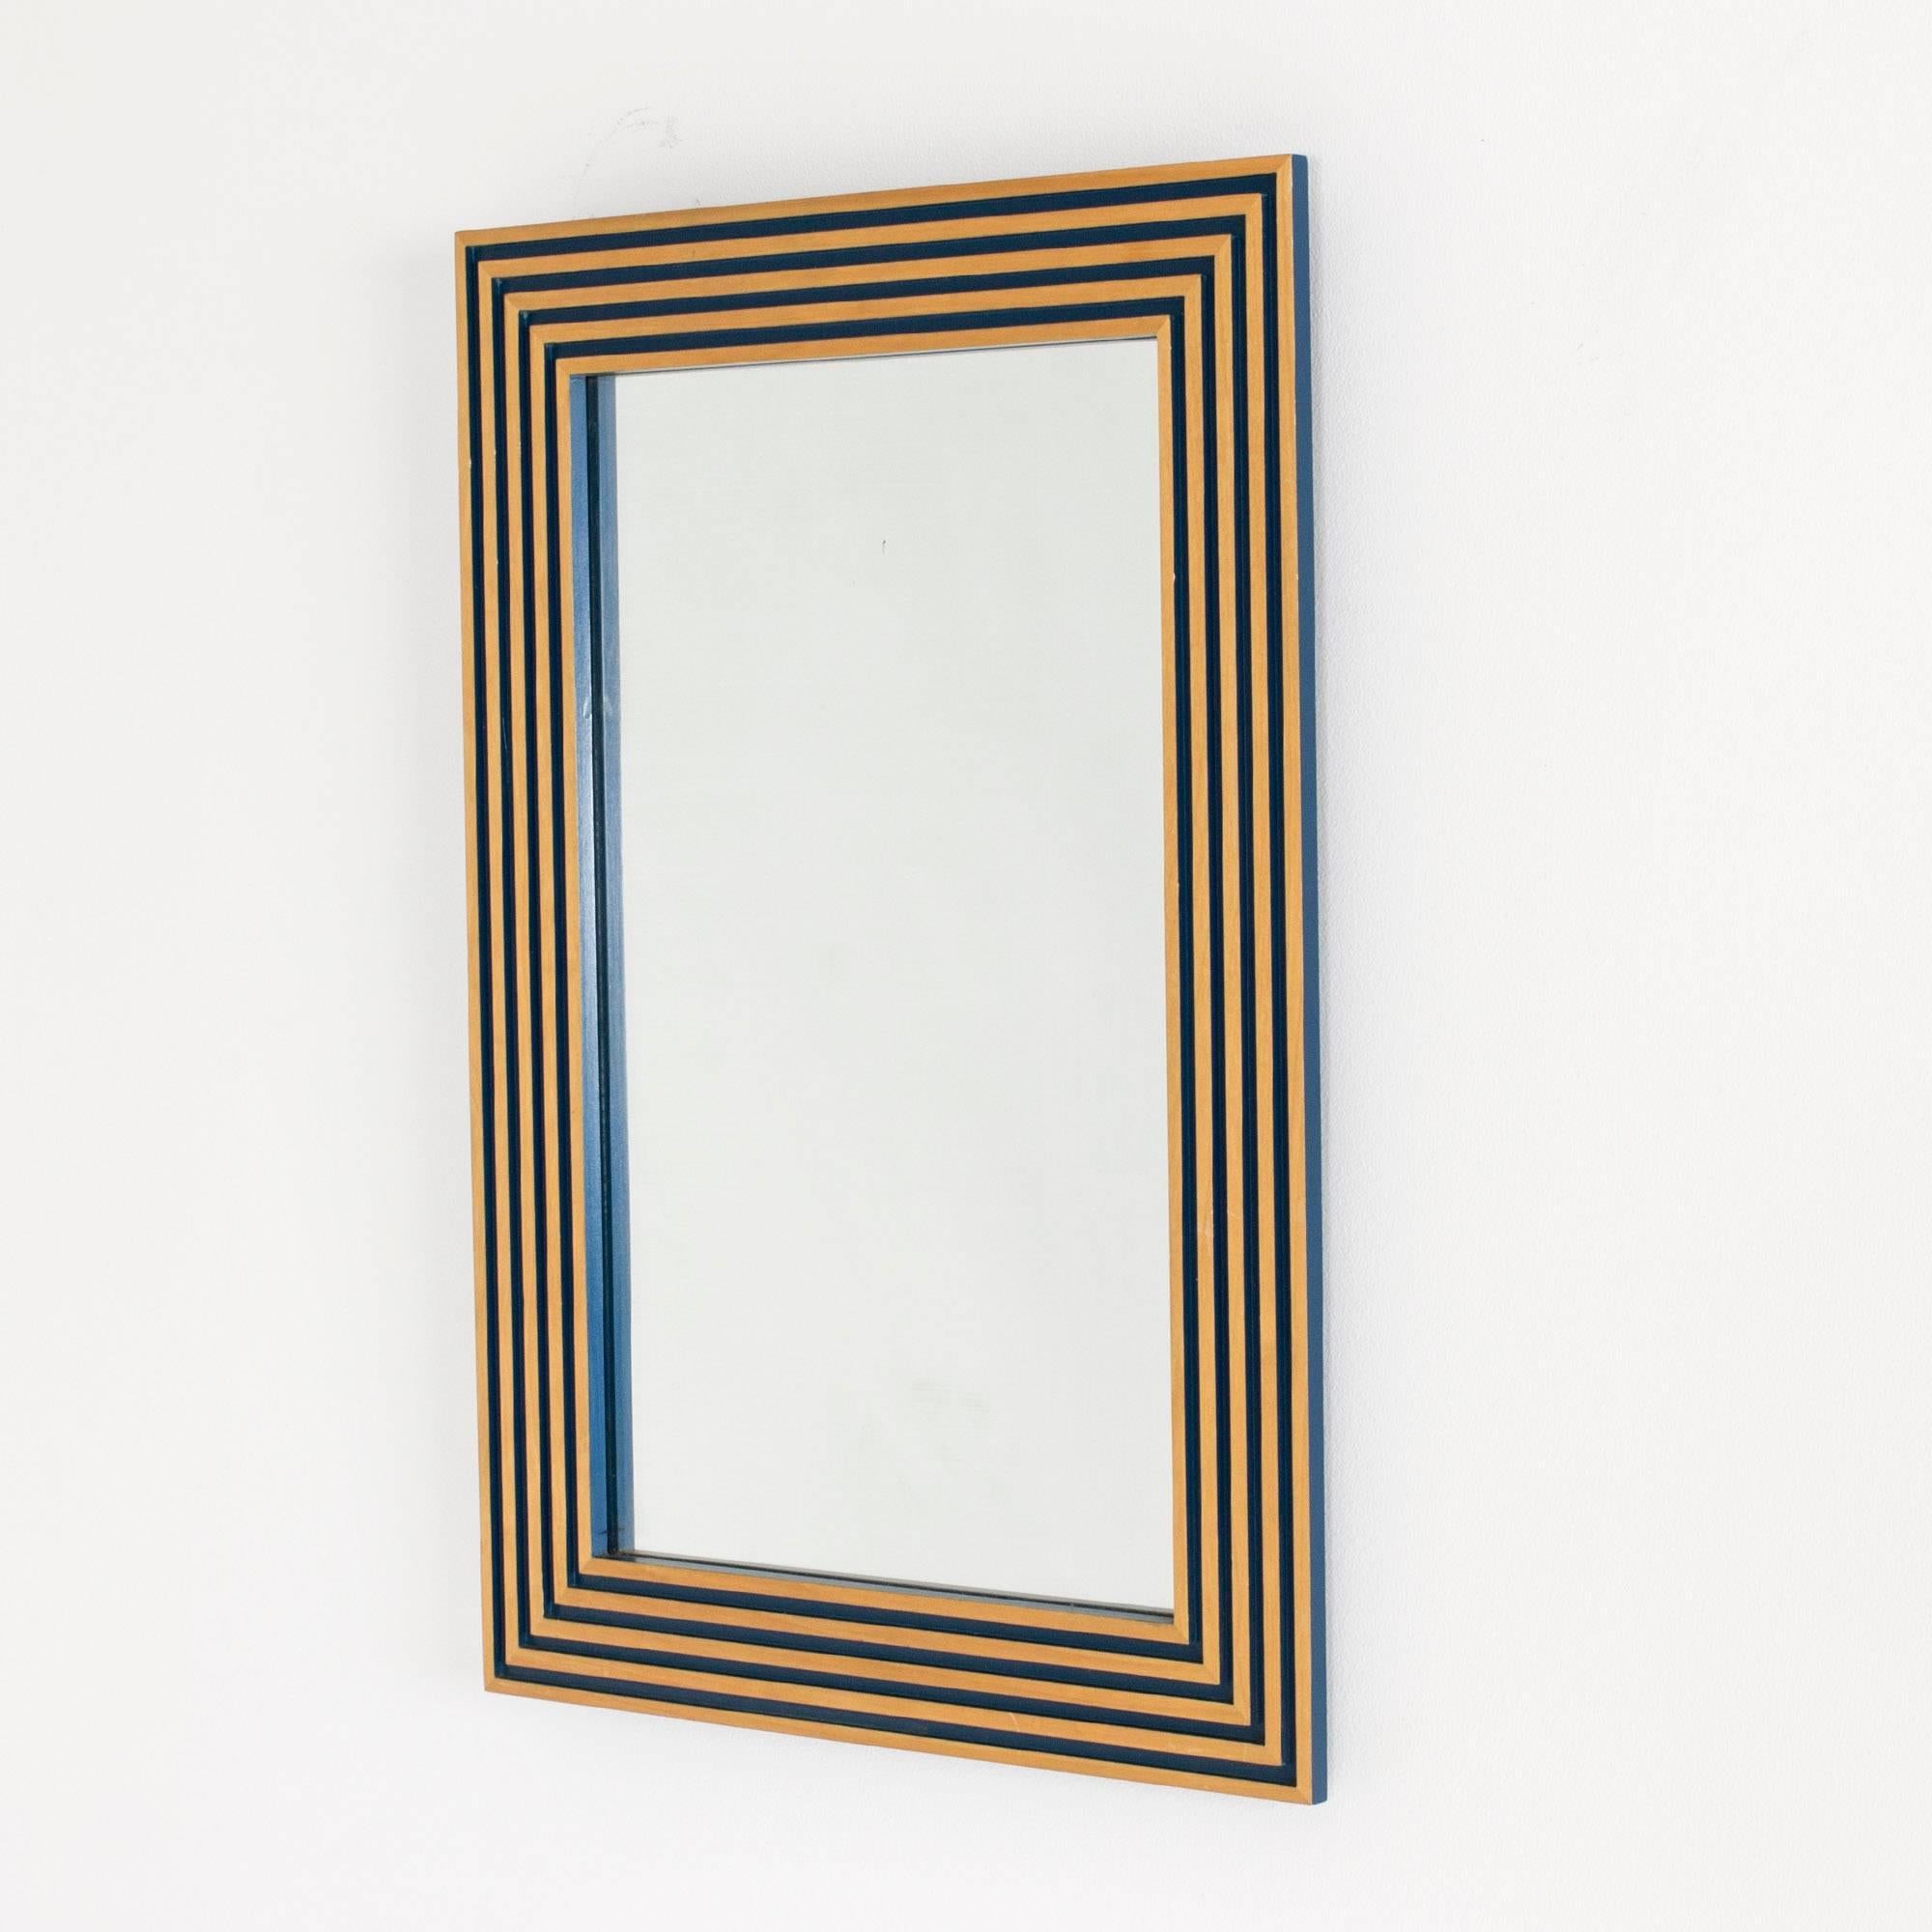 Striking, timeless wall mirror by Susanne Tucker and Maurice Holland, made from wood embossed in a geometrical design. Frame lacquered blue inside the embossments, with wood exposed on the surface, giving an impression of it being gilded.